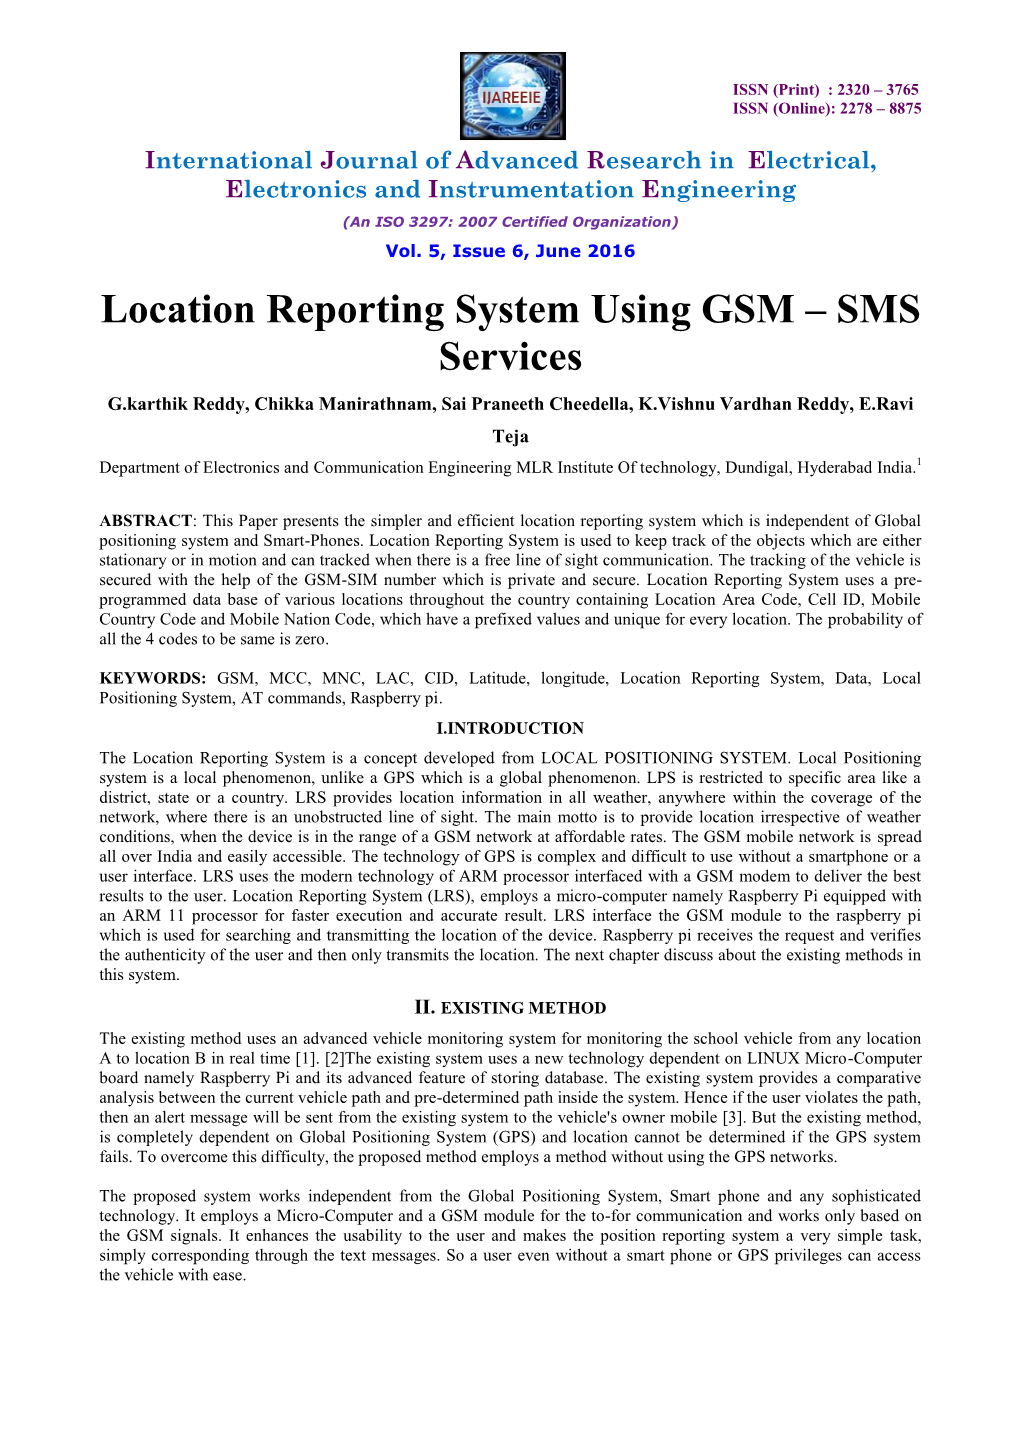 Location Reporting System Using GSM – SMS Services